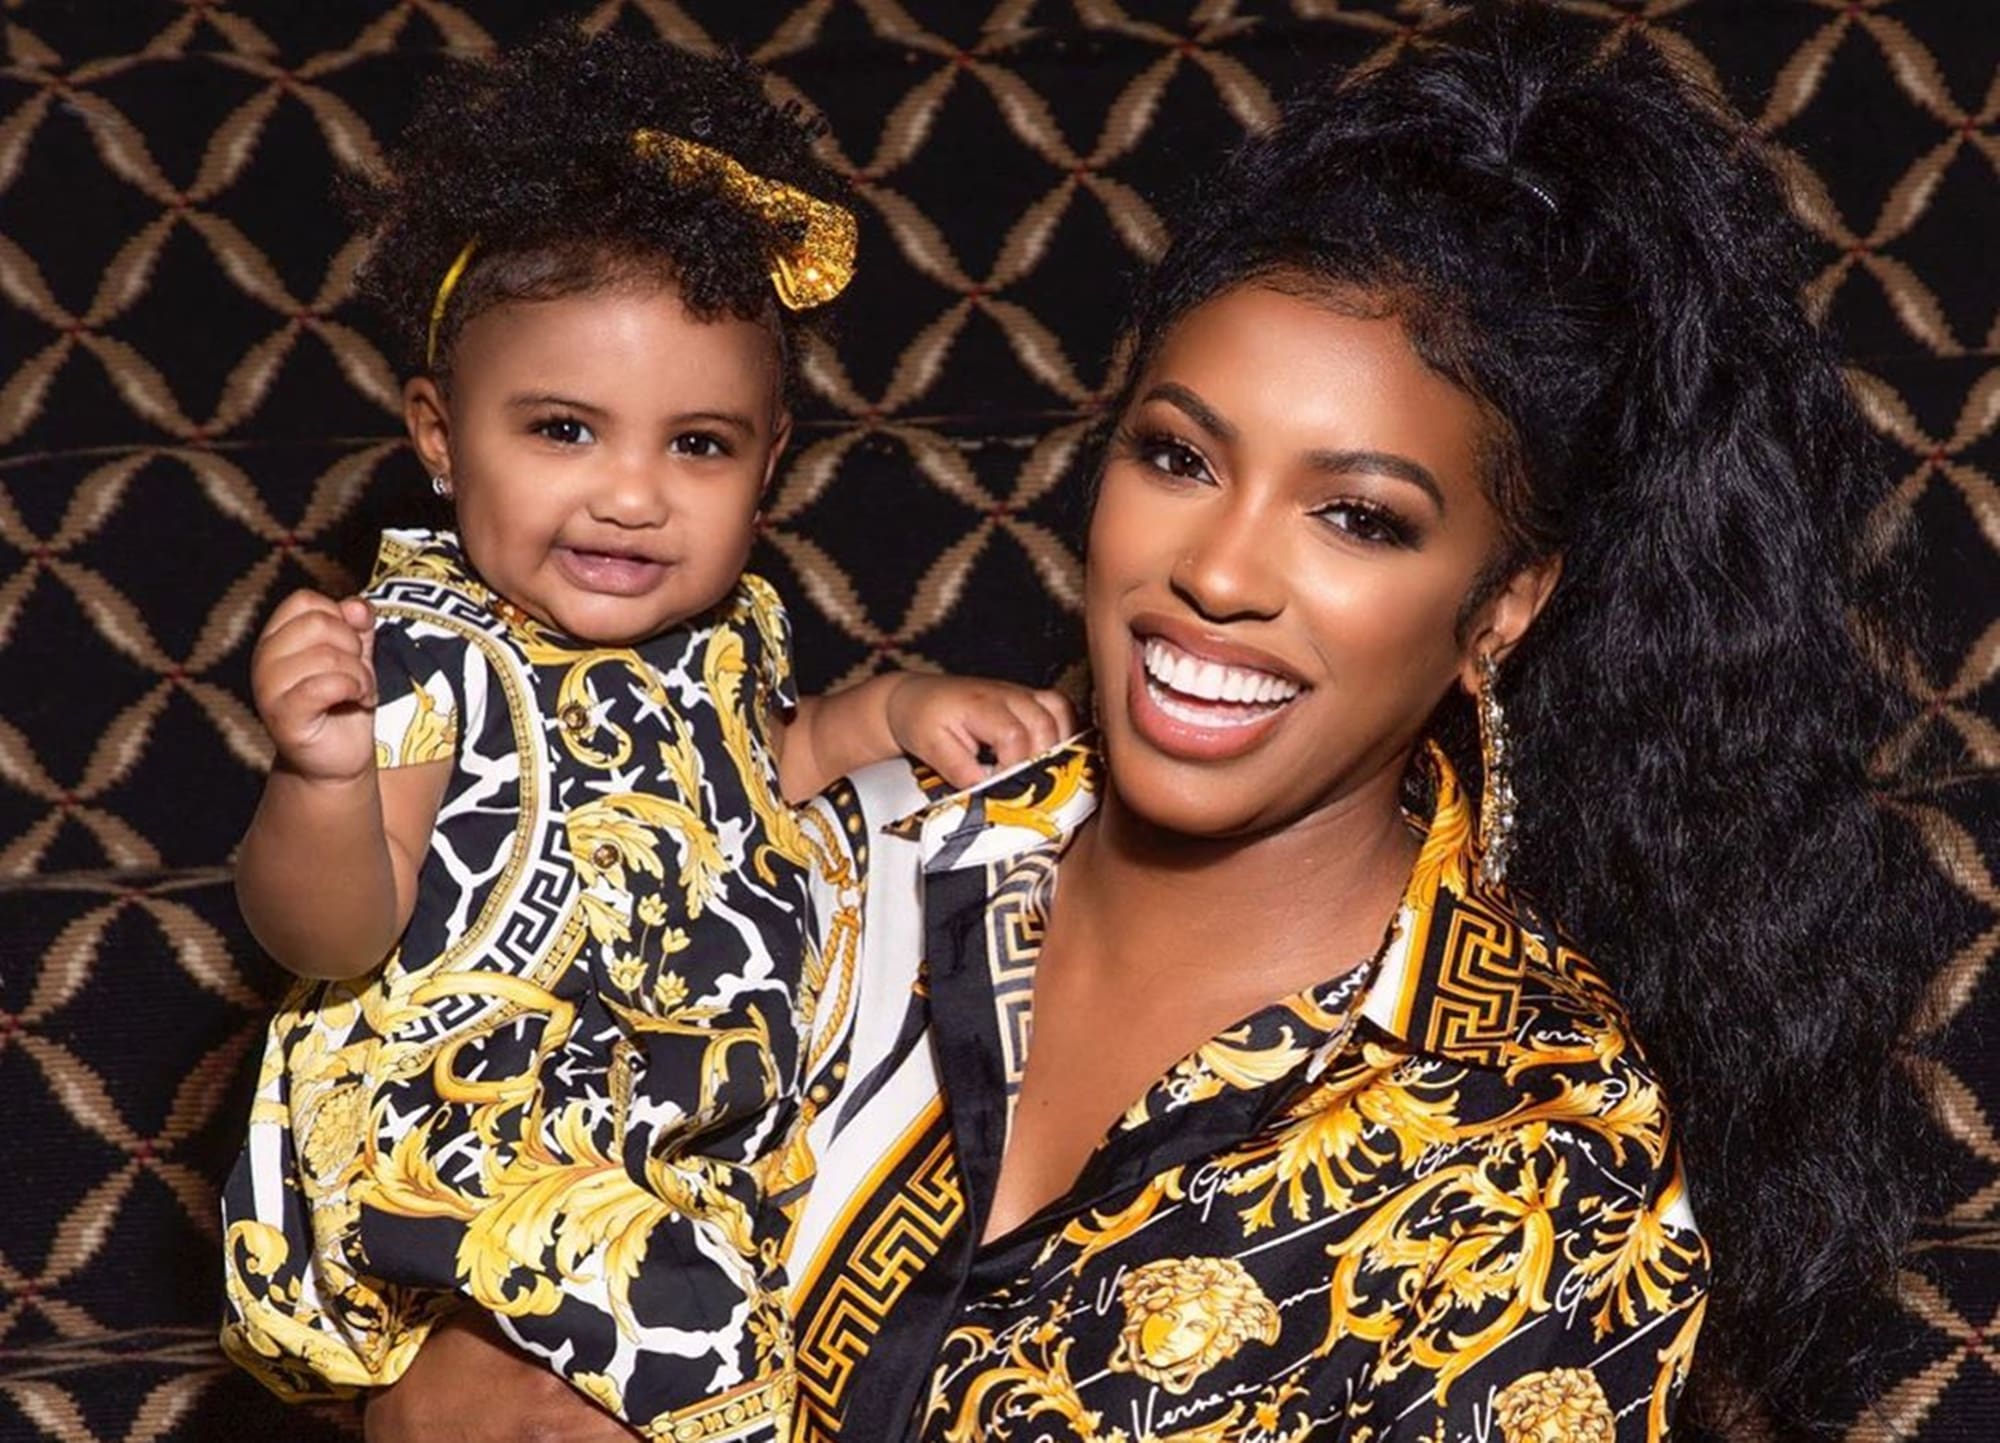 Porsha Williams And Daughter Pilar Jhena McKinley Just Reached A New